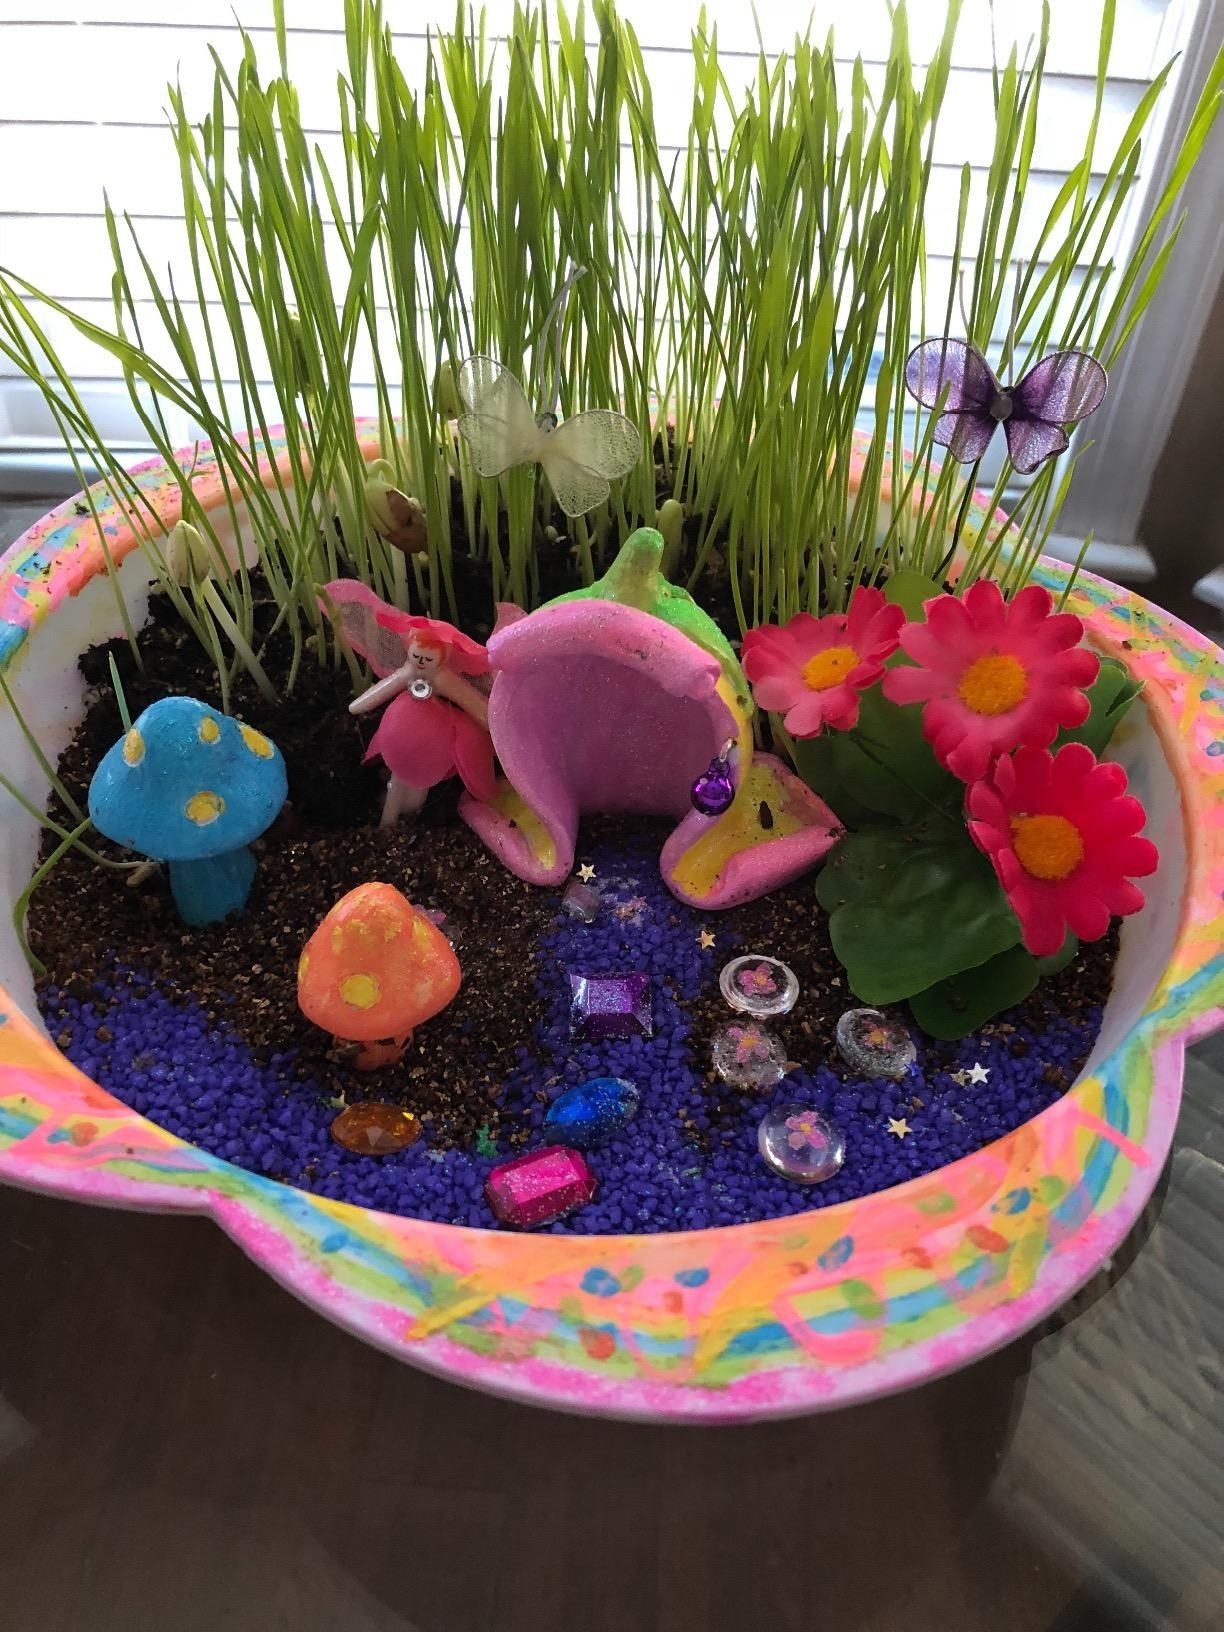 Reviewer photo of their painted garden with magical toadstools, butterflies, and a fairy